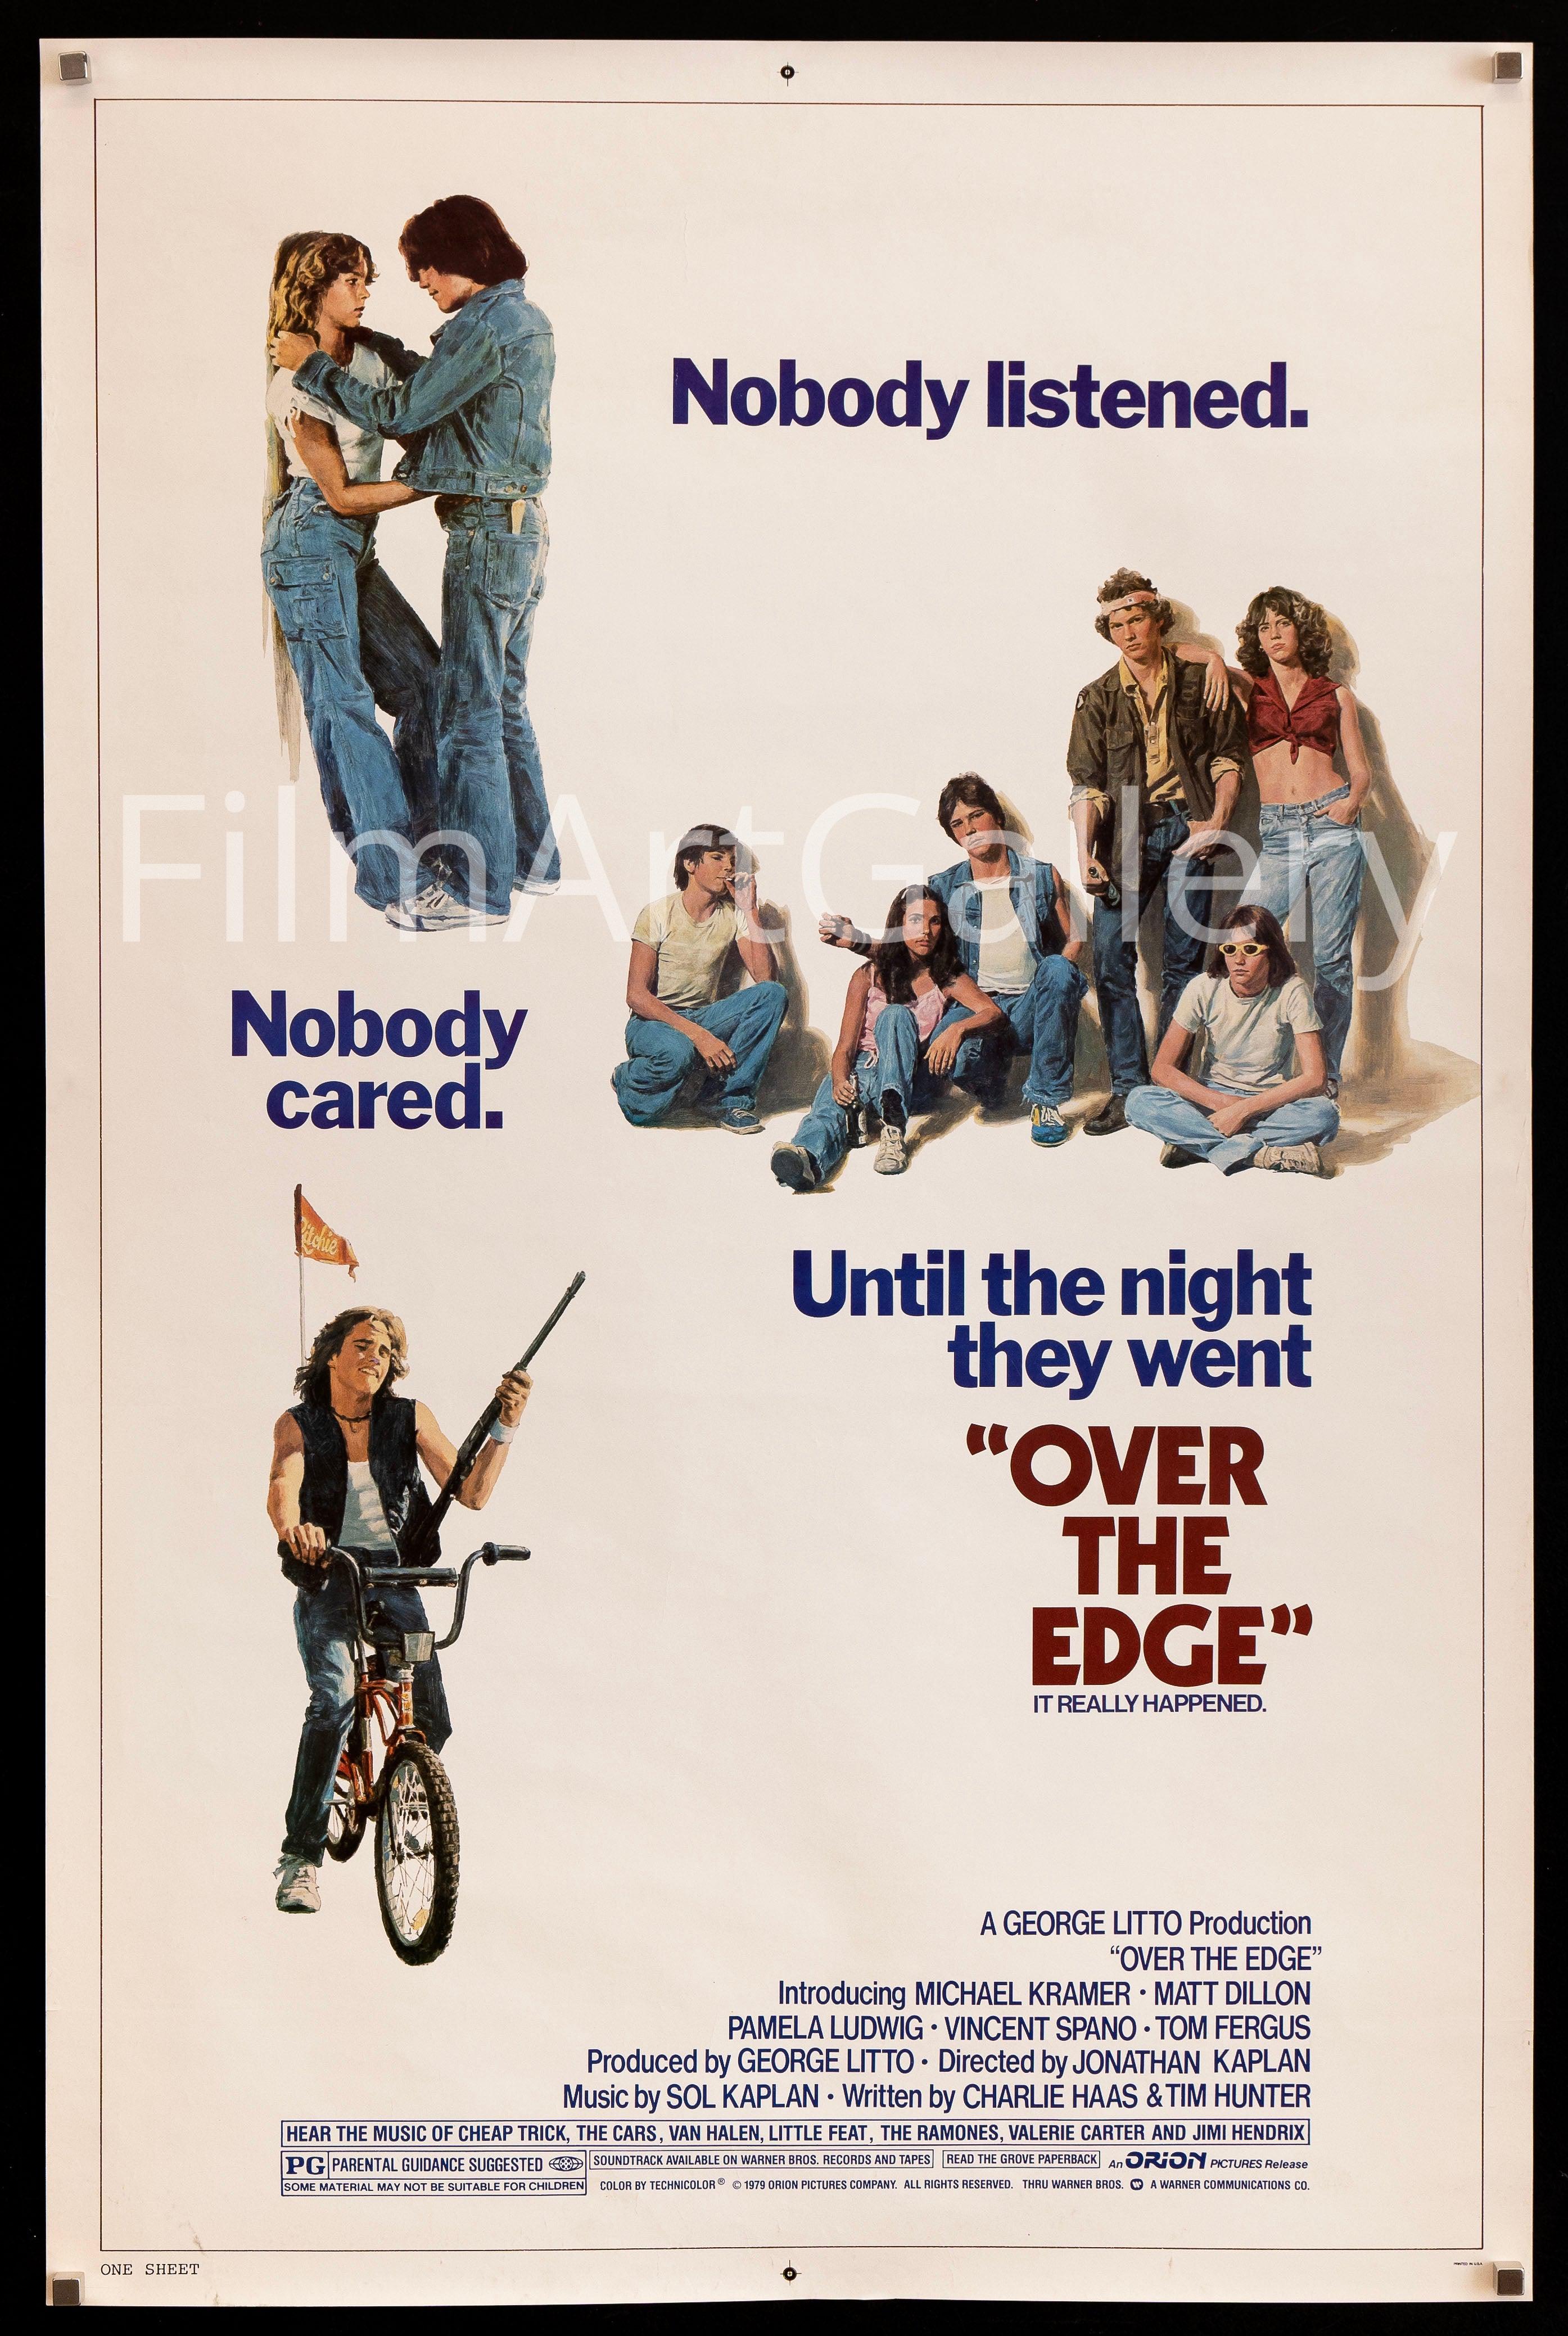 Over the Edge Movie Poster 1979 1 Sheet (27x41)